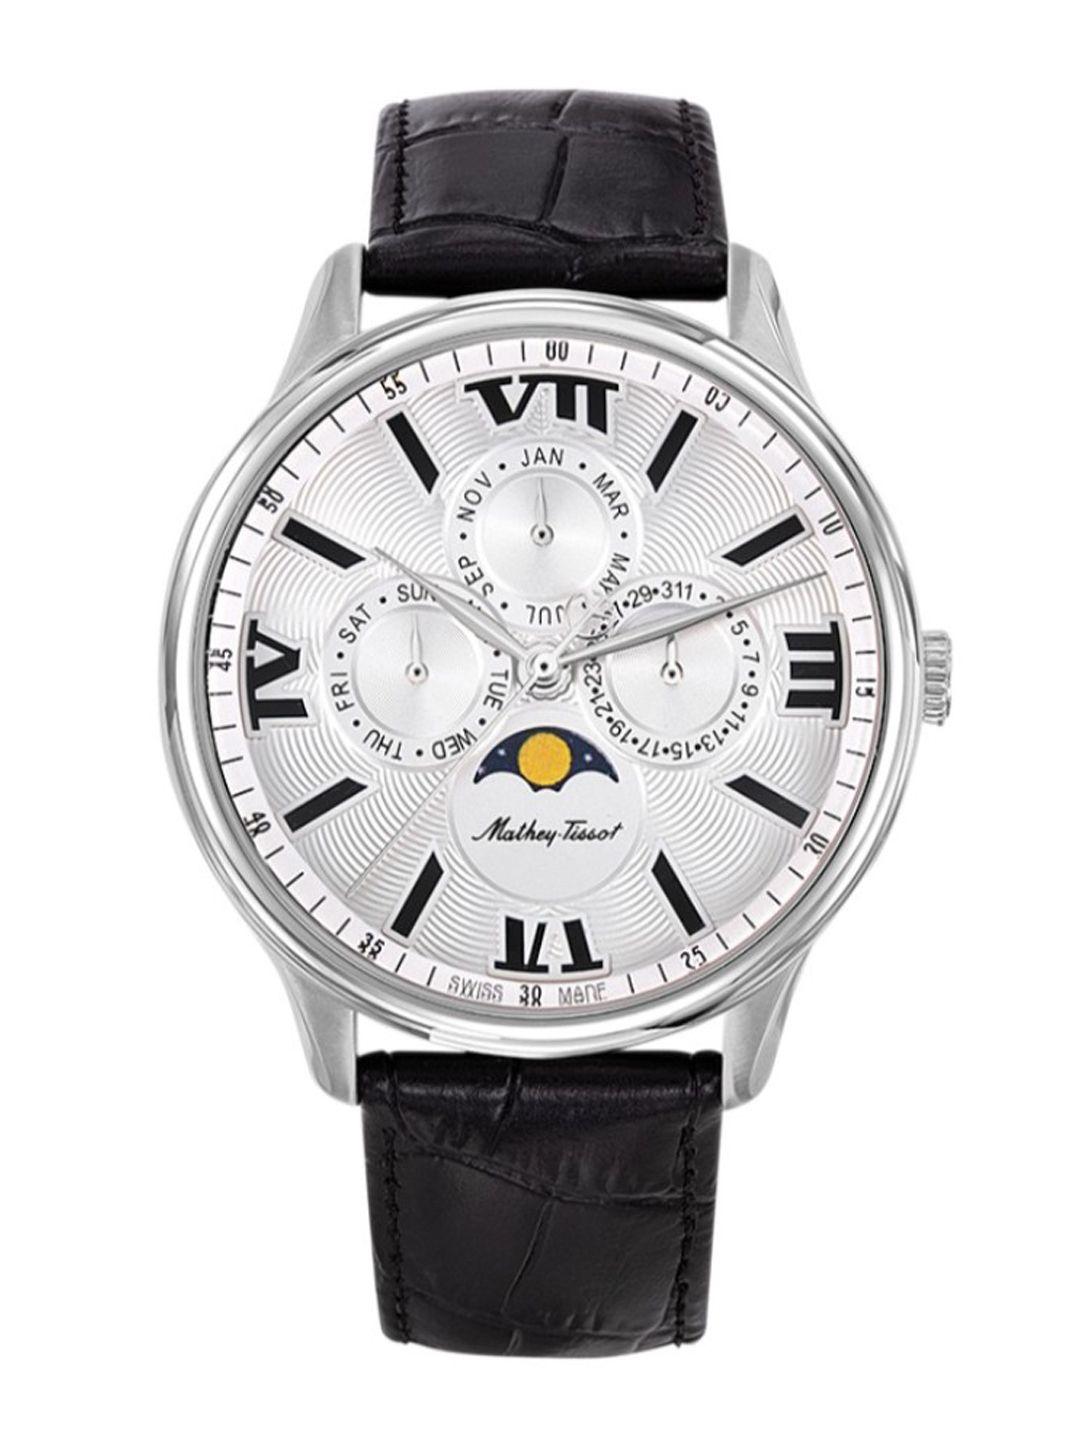 mathey-tissot men silver-toned brass patterned dial & black leather straps analogue watch